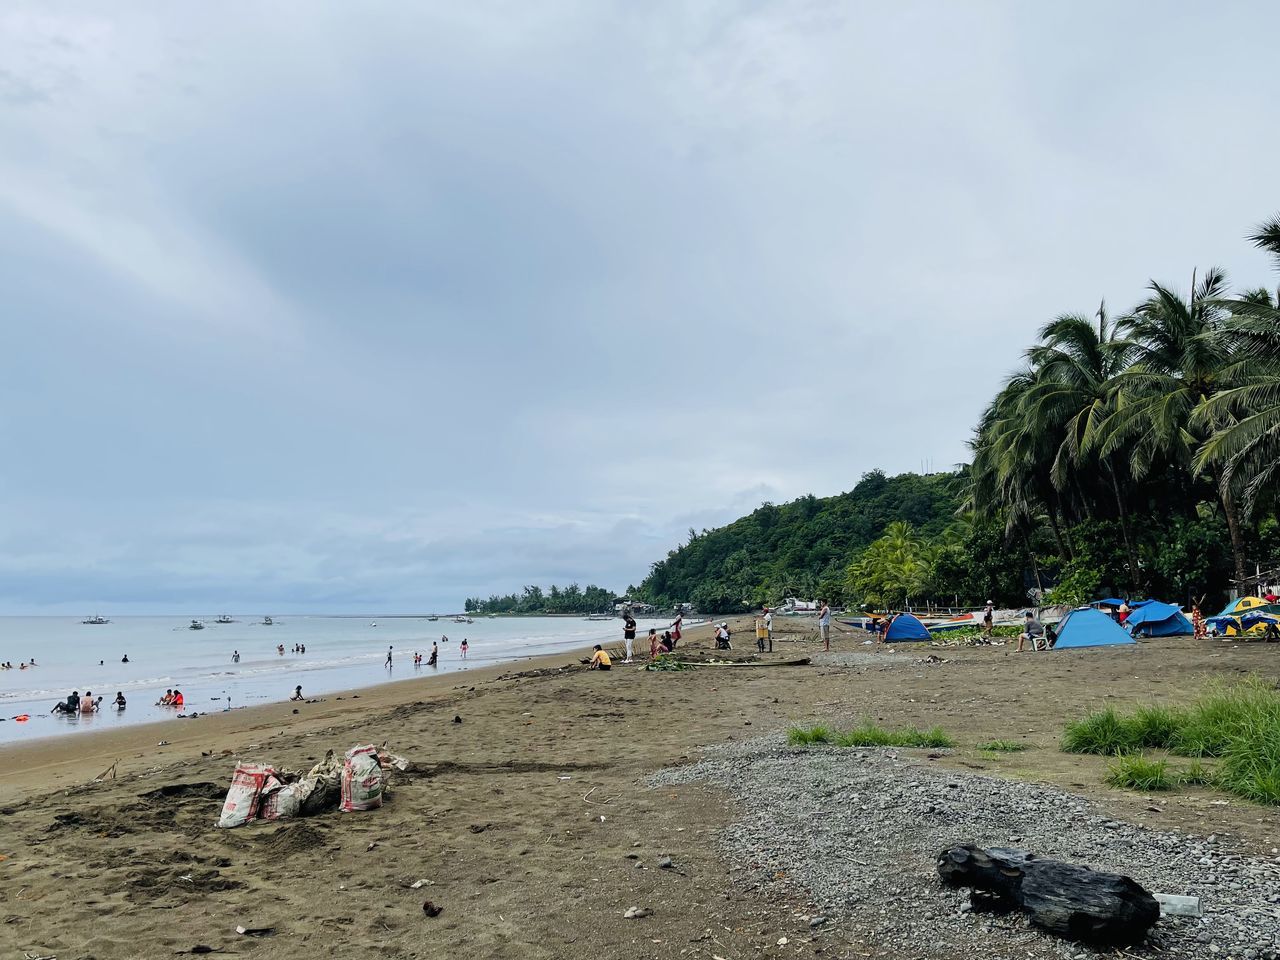 beach, land, sea, water, body of water, sky, sand, nature, holiday, coast, vacation, trip, shore, large group of people, tree, cloud, group of people, ocean, tropical climate, crowd, beauty in nature, scenics - nature, travel destinations, palm tree, travel, plant, relaxation, tourism, day, coastline, leisure activity, outdoors, summer, tourist, bay, tranquility, environment, hut, idyllic, tranquil scene, lifestyles, island, non-urban scene, men